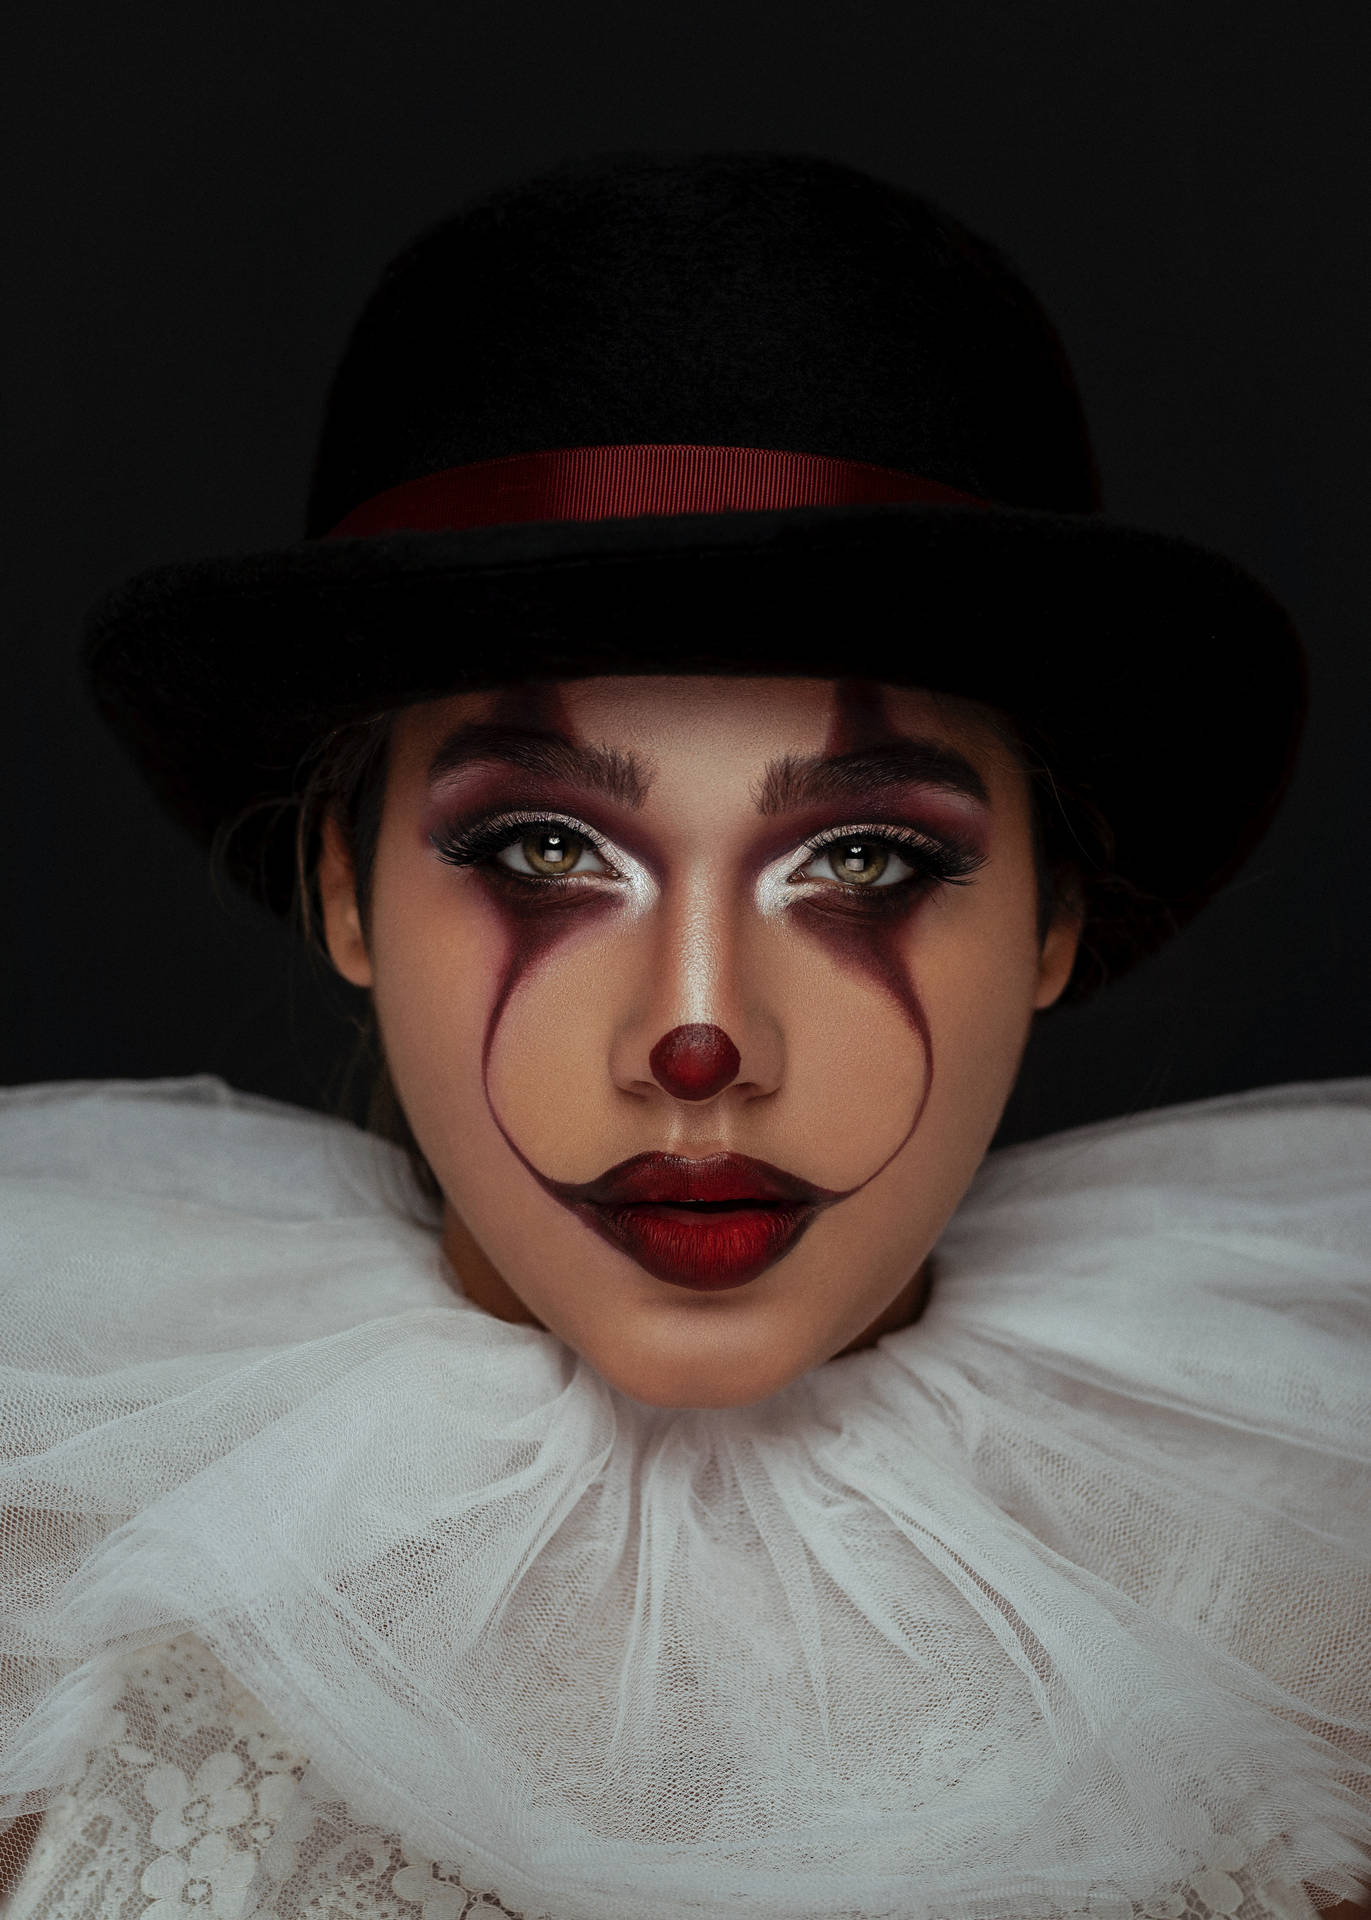 A Creative Take On A Classic Clown Look Background